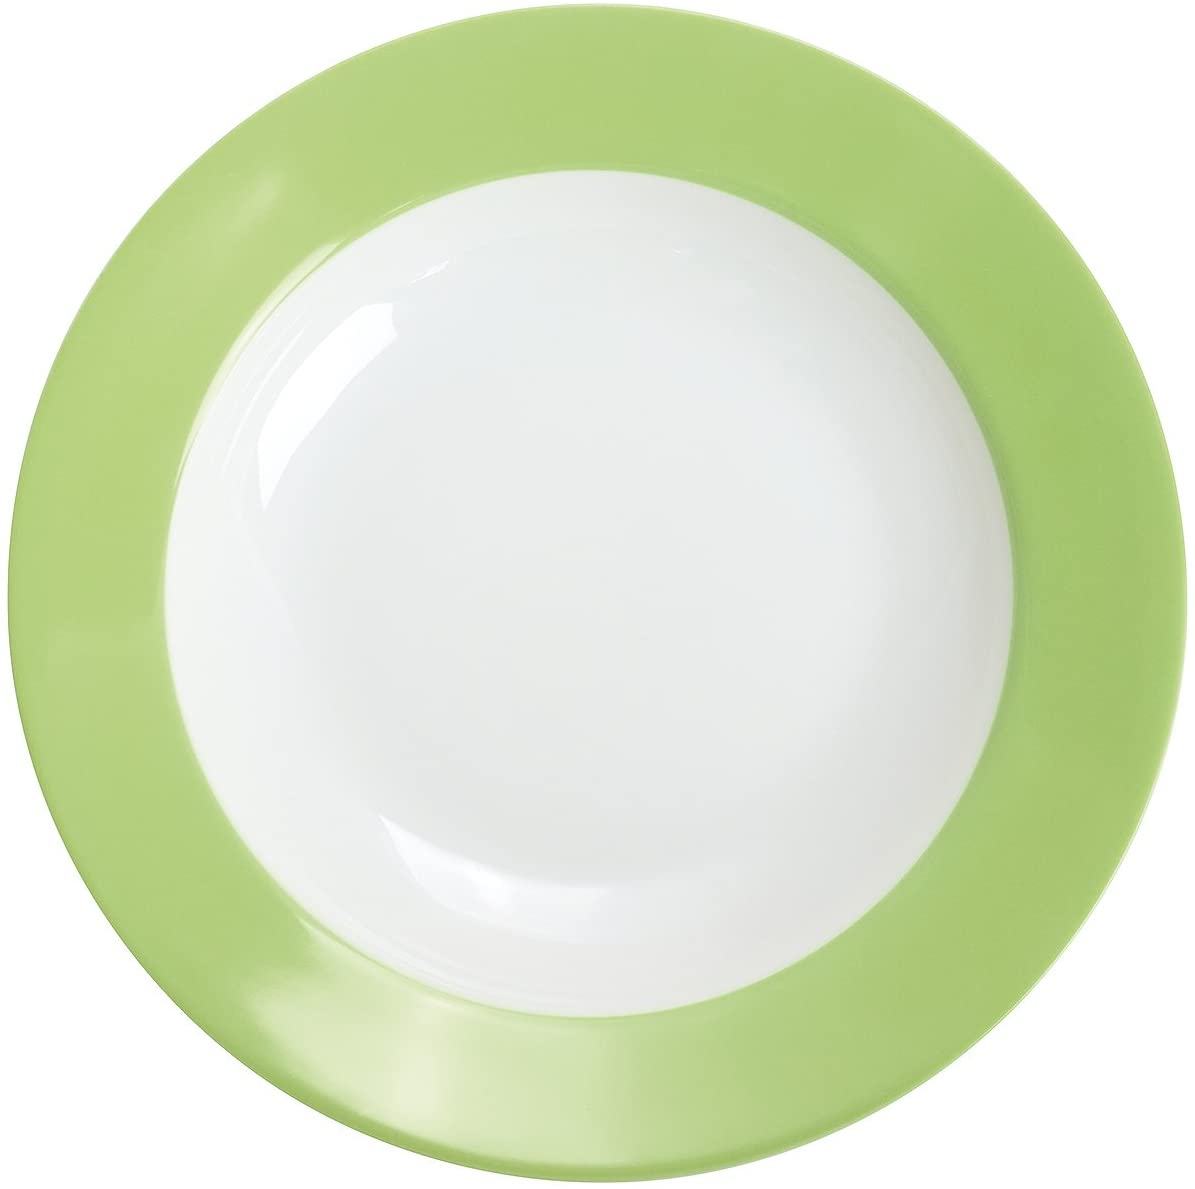 Kahla Pronto colore Soup Plate with Crockery Design in Original Packaging